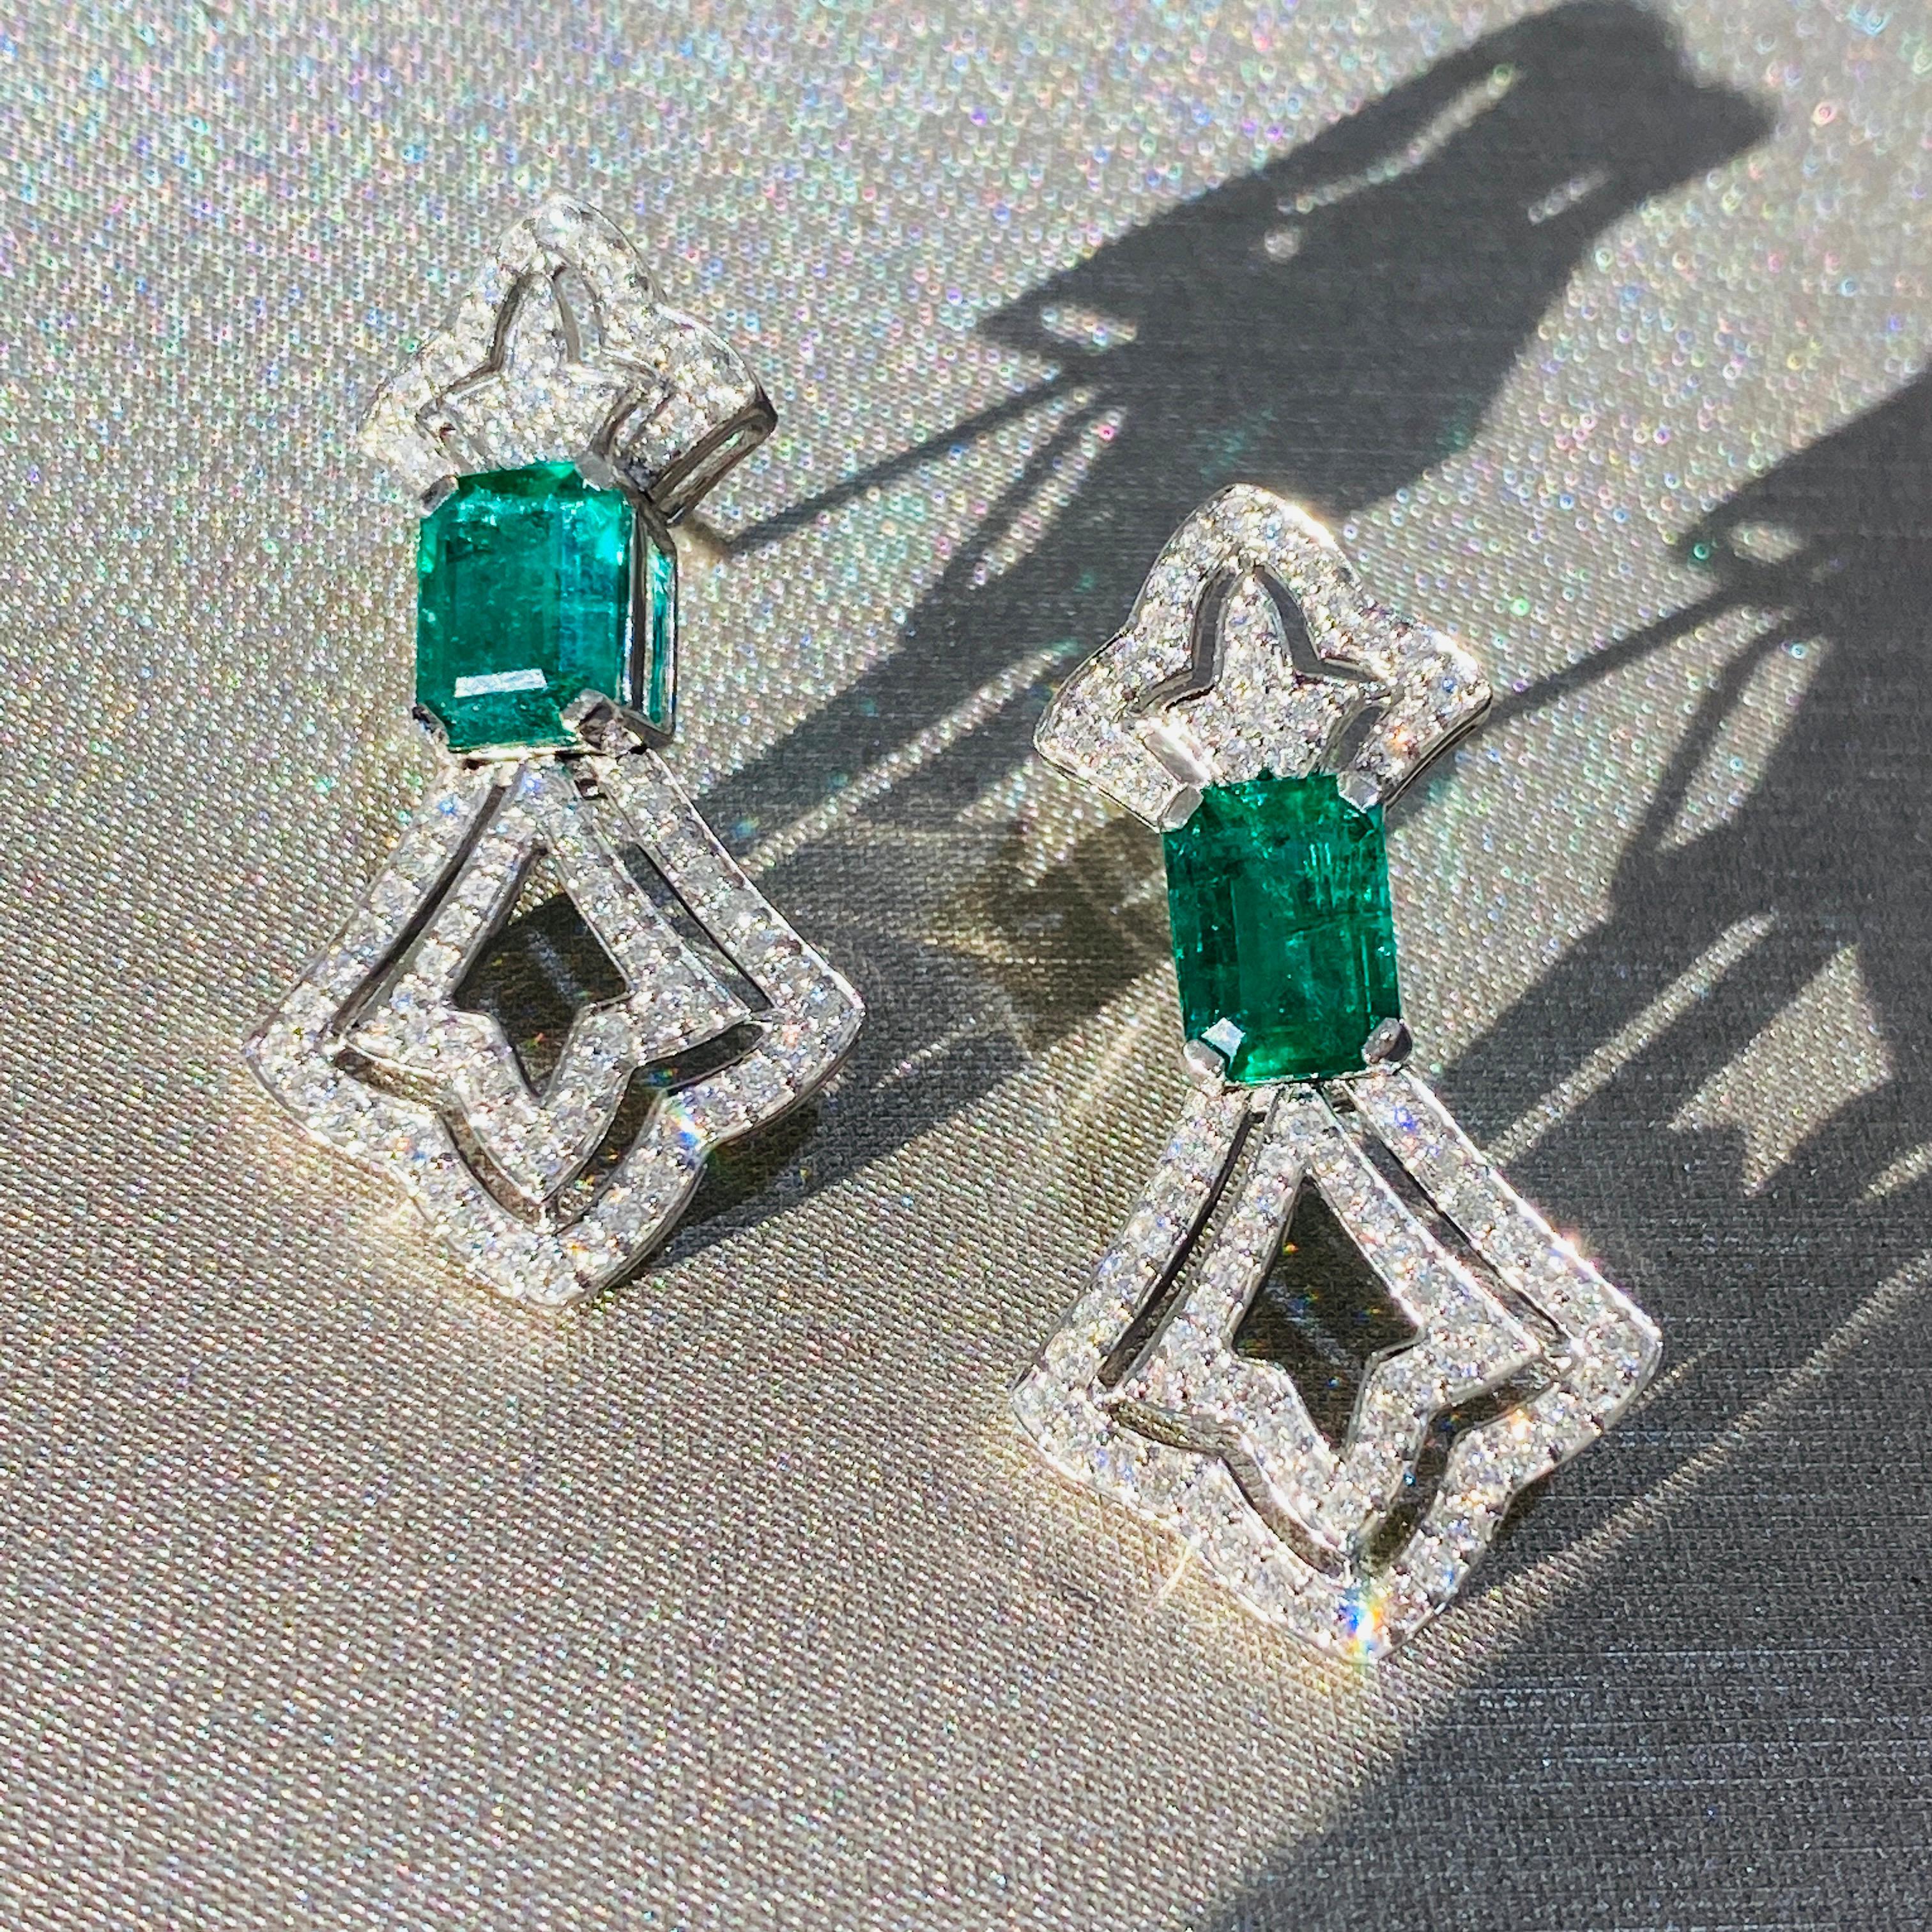 Tresor Diamond Earring features 0.94 cts diamond and 2.76 cts emerald in 18k white gold. The Earring are an ode to the luxurious yet classic beauty with sparkly diamonds. Their contemporary and modern design makes them versatile in their use. The